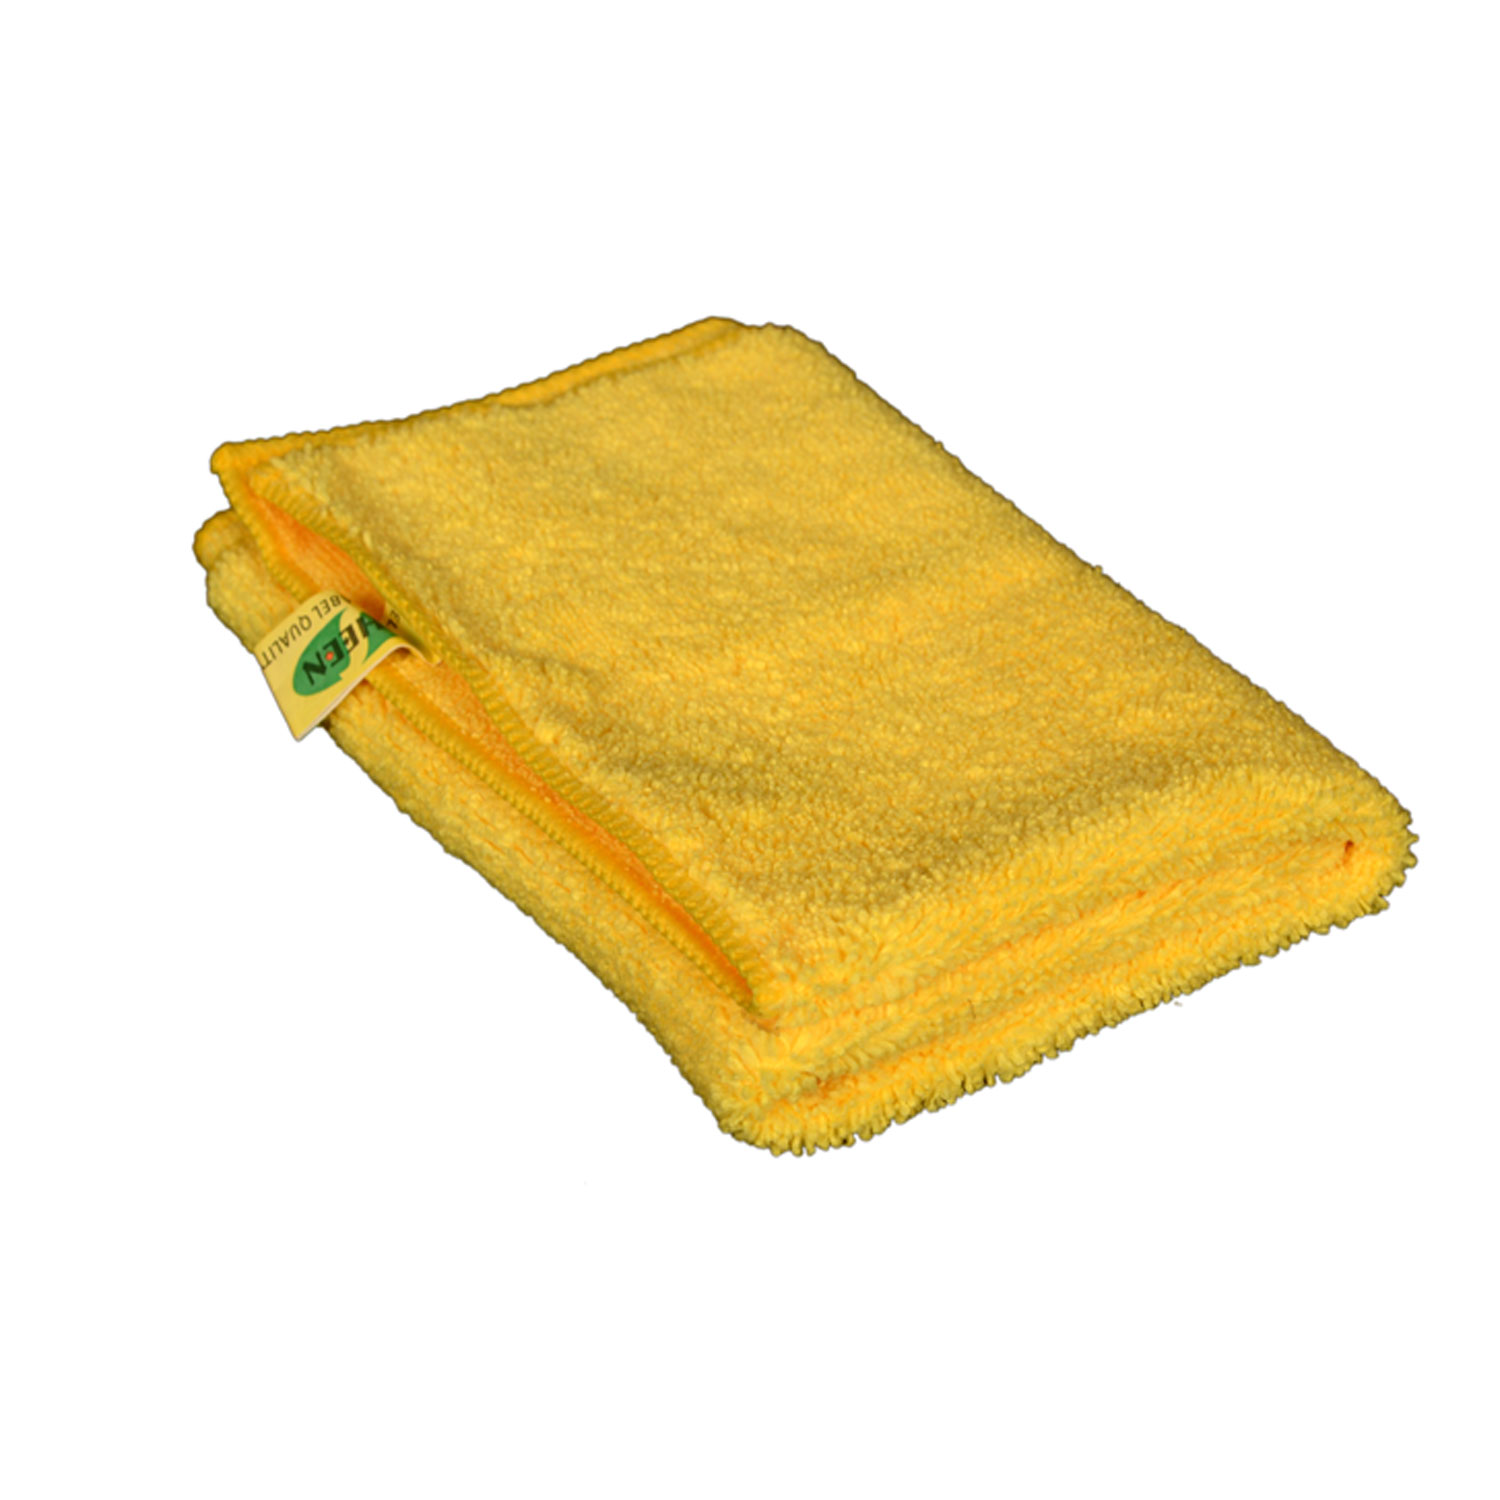 Sheen Microfiber cleaning cloth | Home cleaning cloth | 35X75 CM | 300GSM | PACK OF 1 | YELLOW